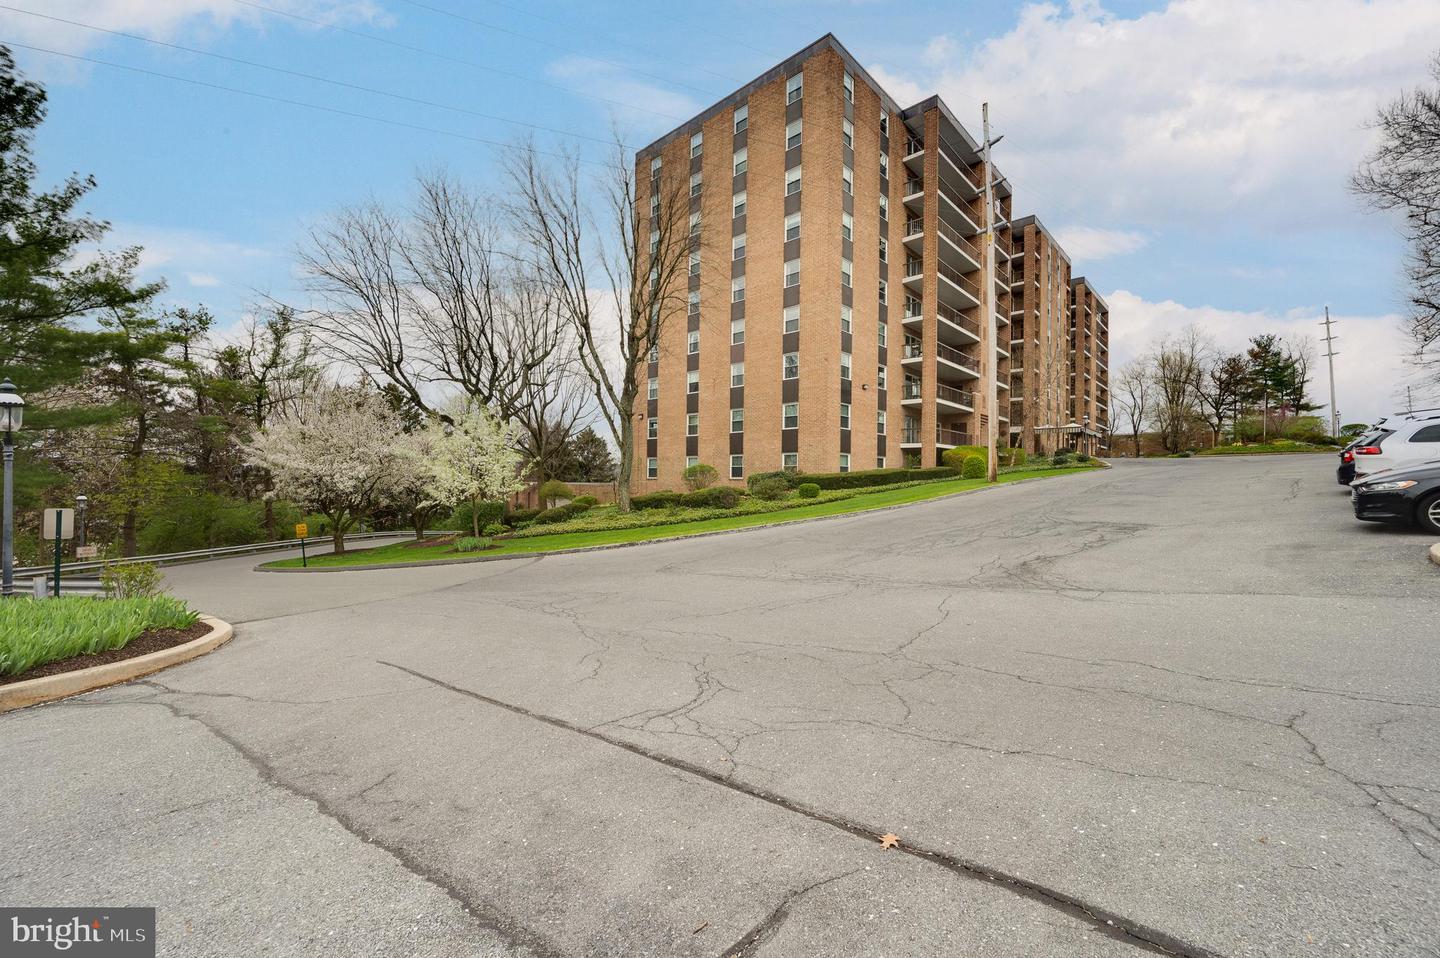 1375 Pershing Boulevard UNIT 306, Reading, PA 19607 | MLS PABK2014538 |  Listing Information | Homes for Sale and Rent